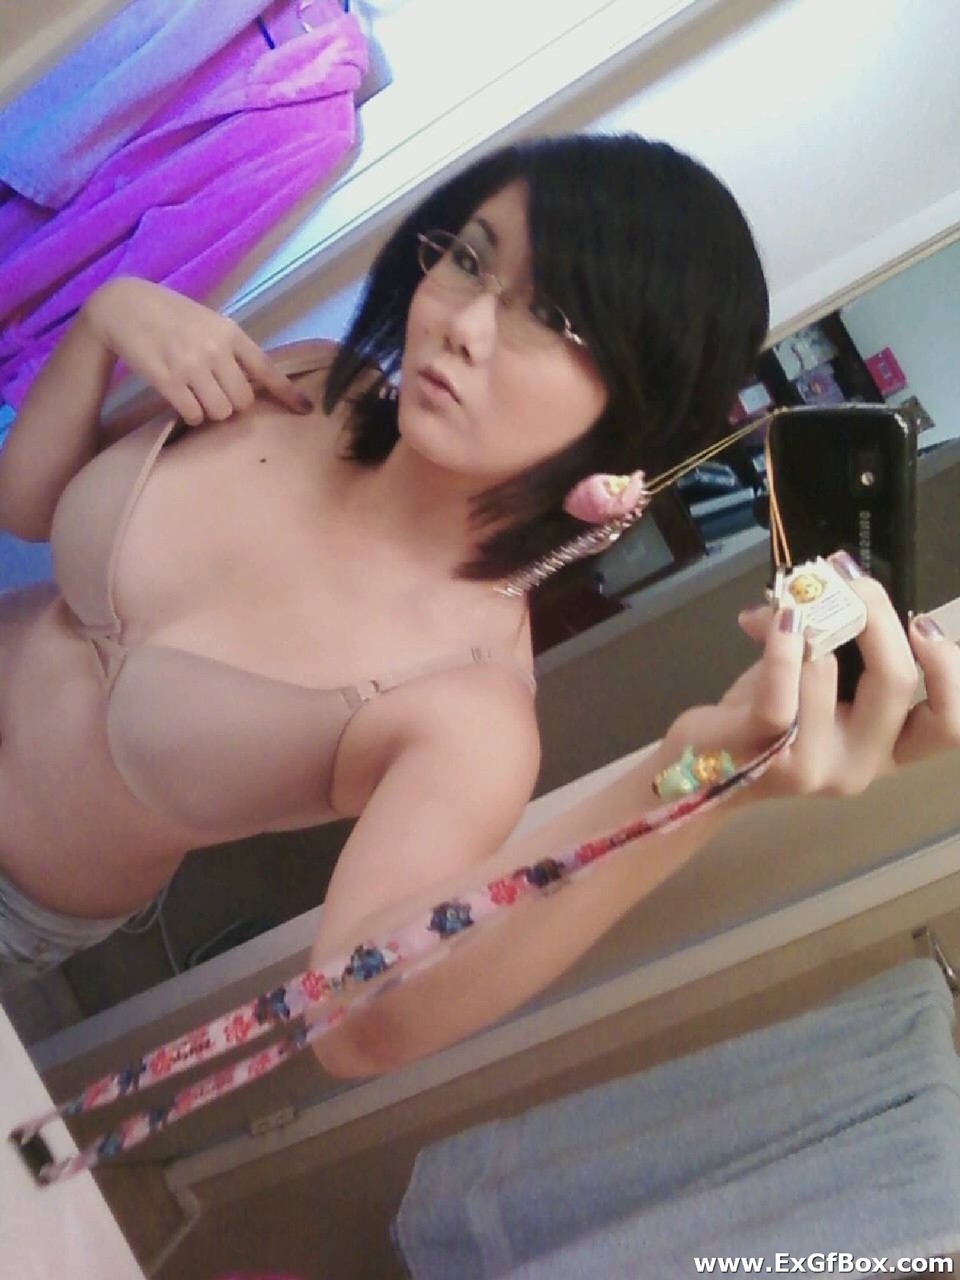 Sweet Asian girl with stunning big tits Chiyoko poses in front of a mirror photo porno #428507963 | Ex GF Box Pics, Selfie, porno mobile